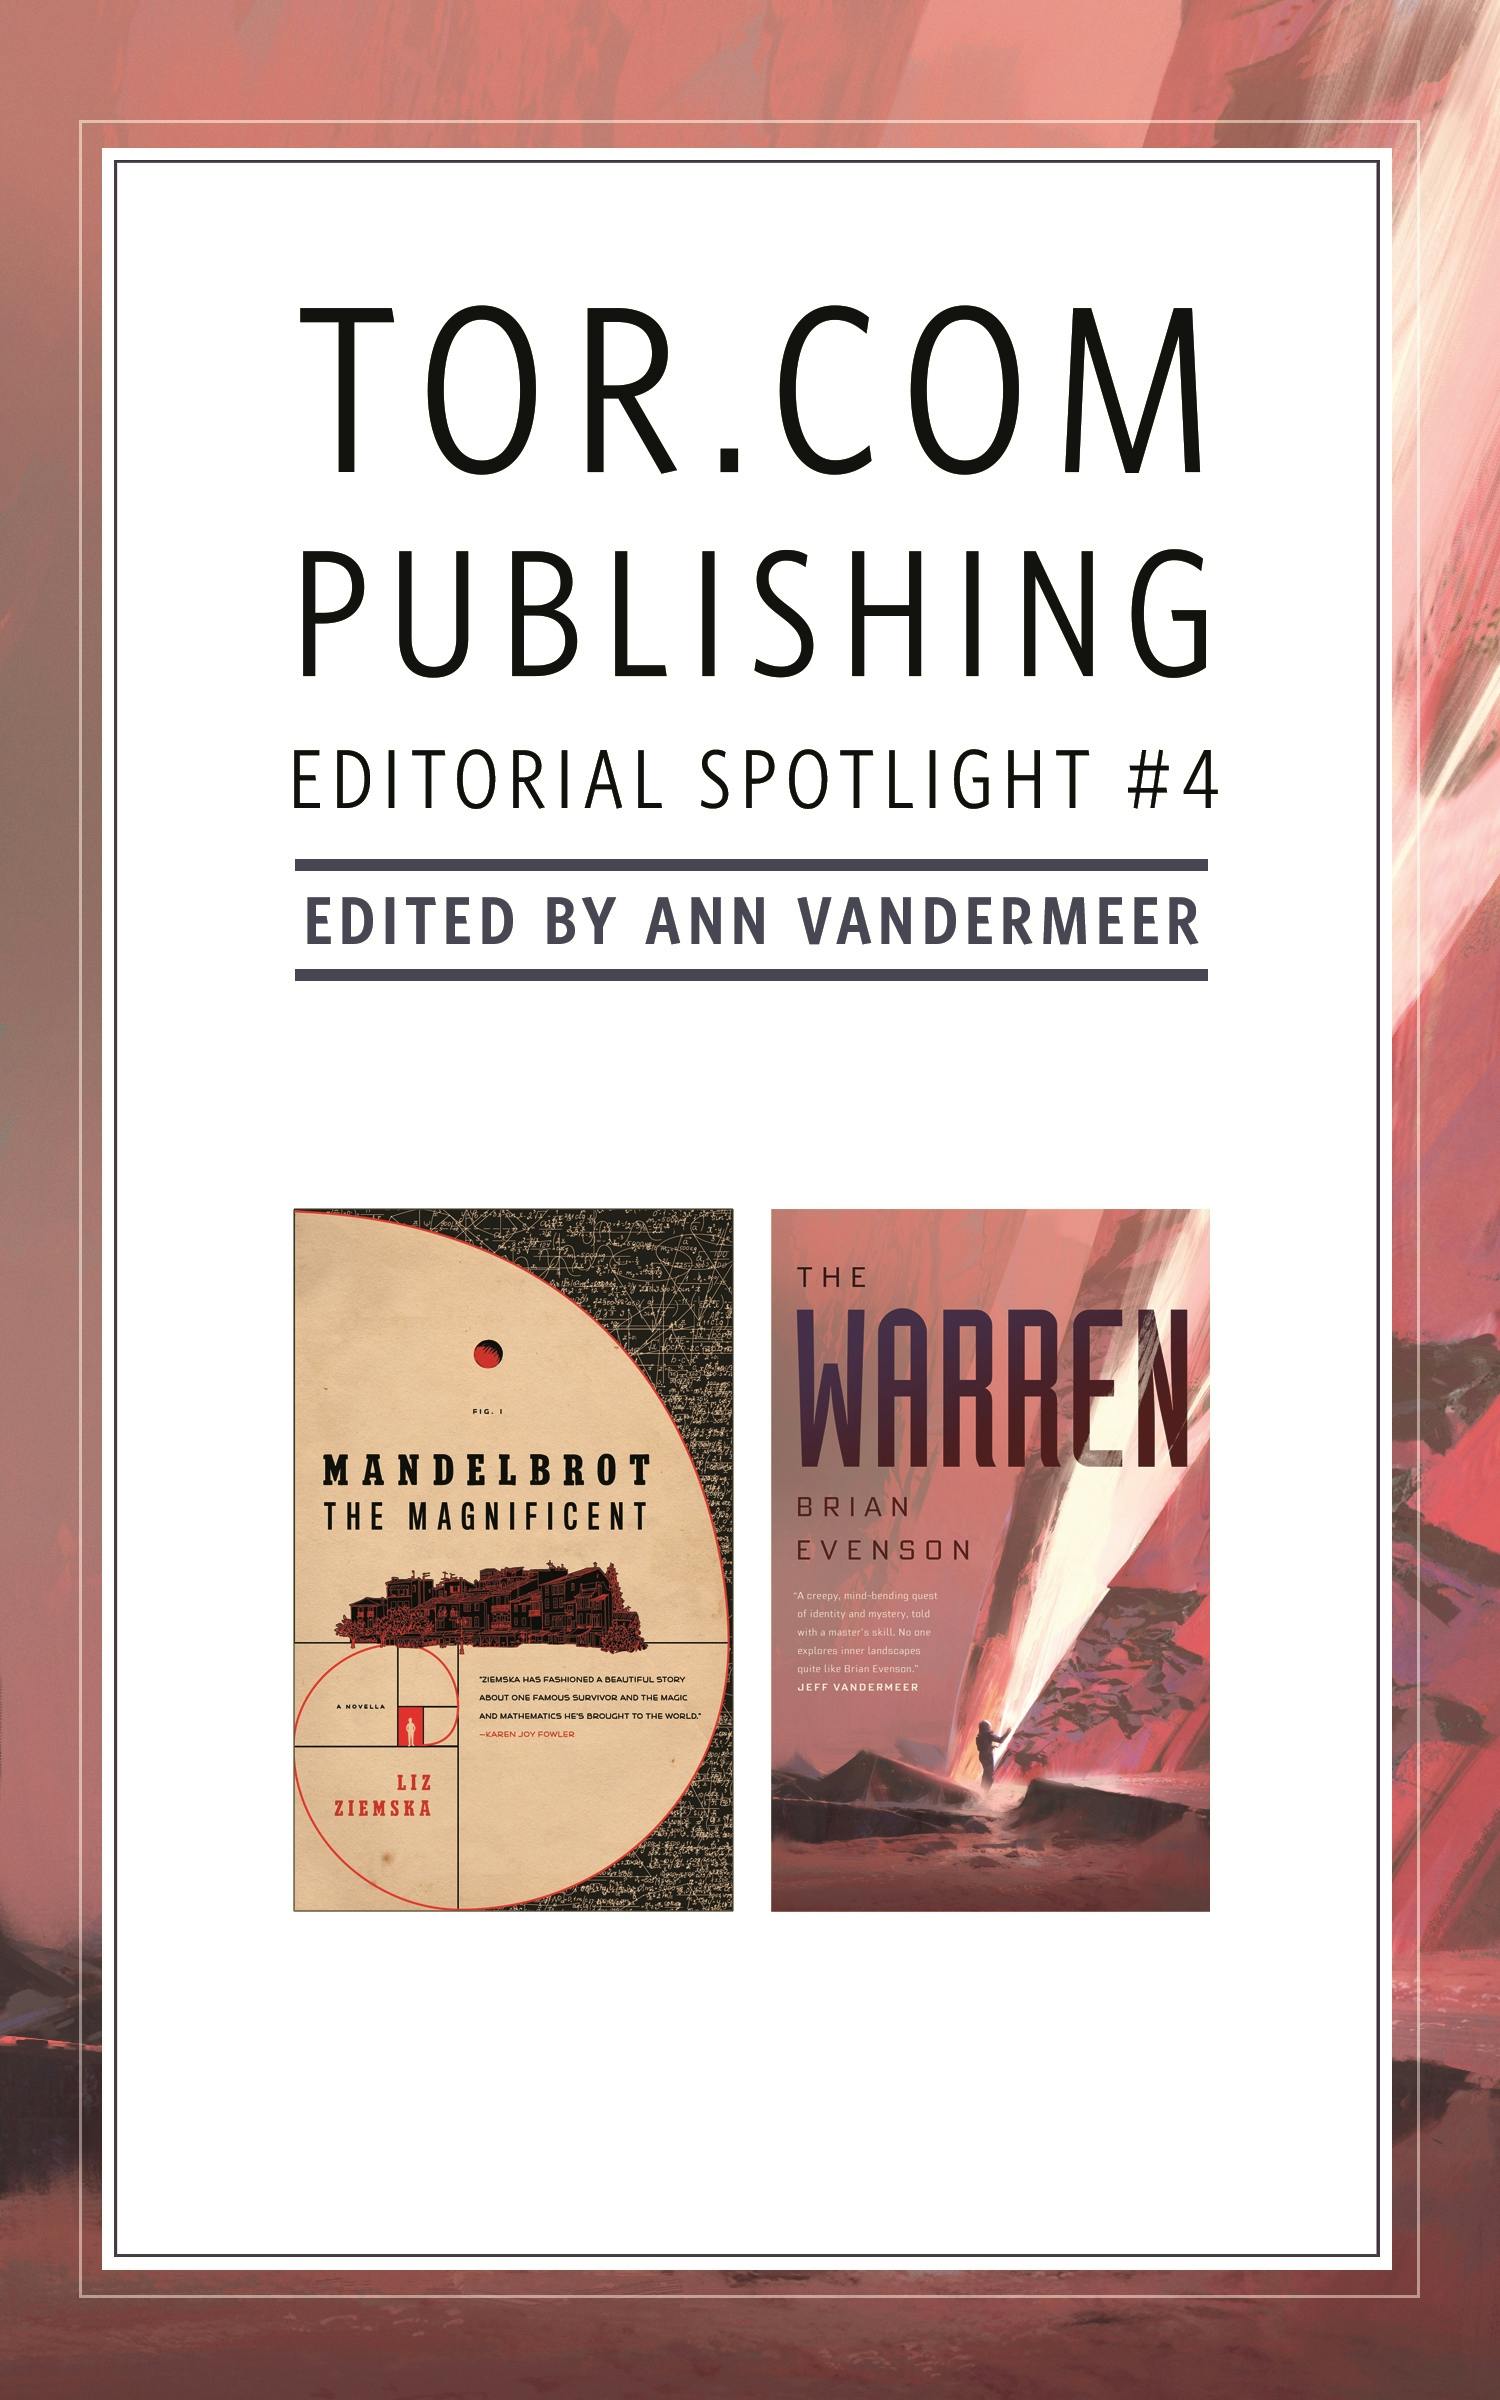 Cover for the book titled as: Tor.com Publishing Editorial Spotlight #4